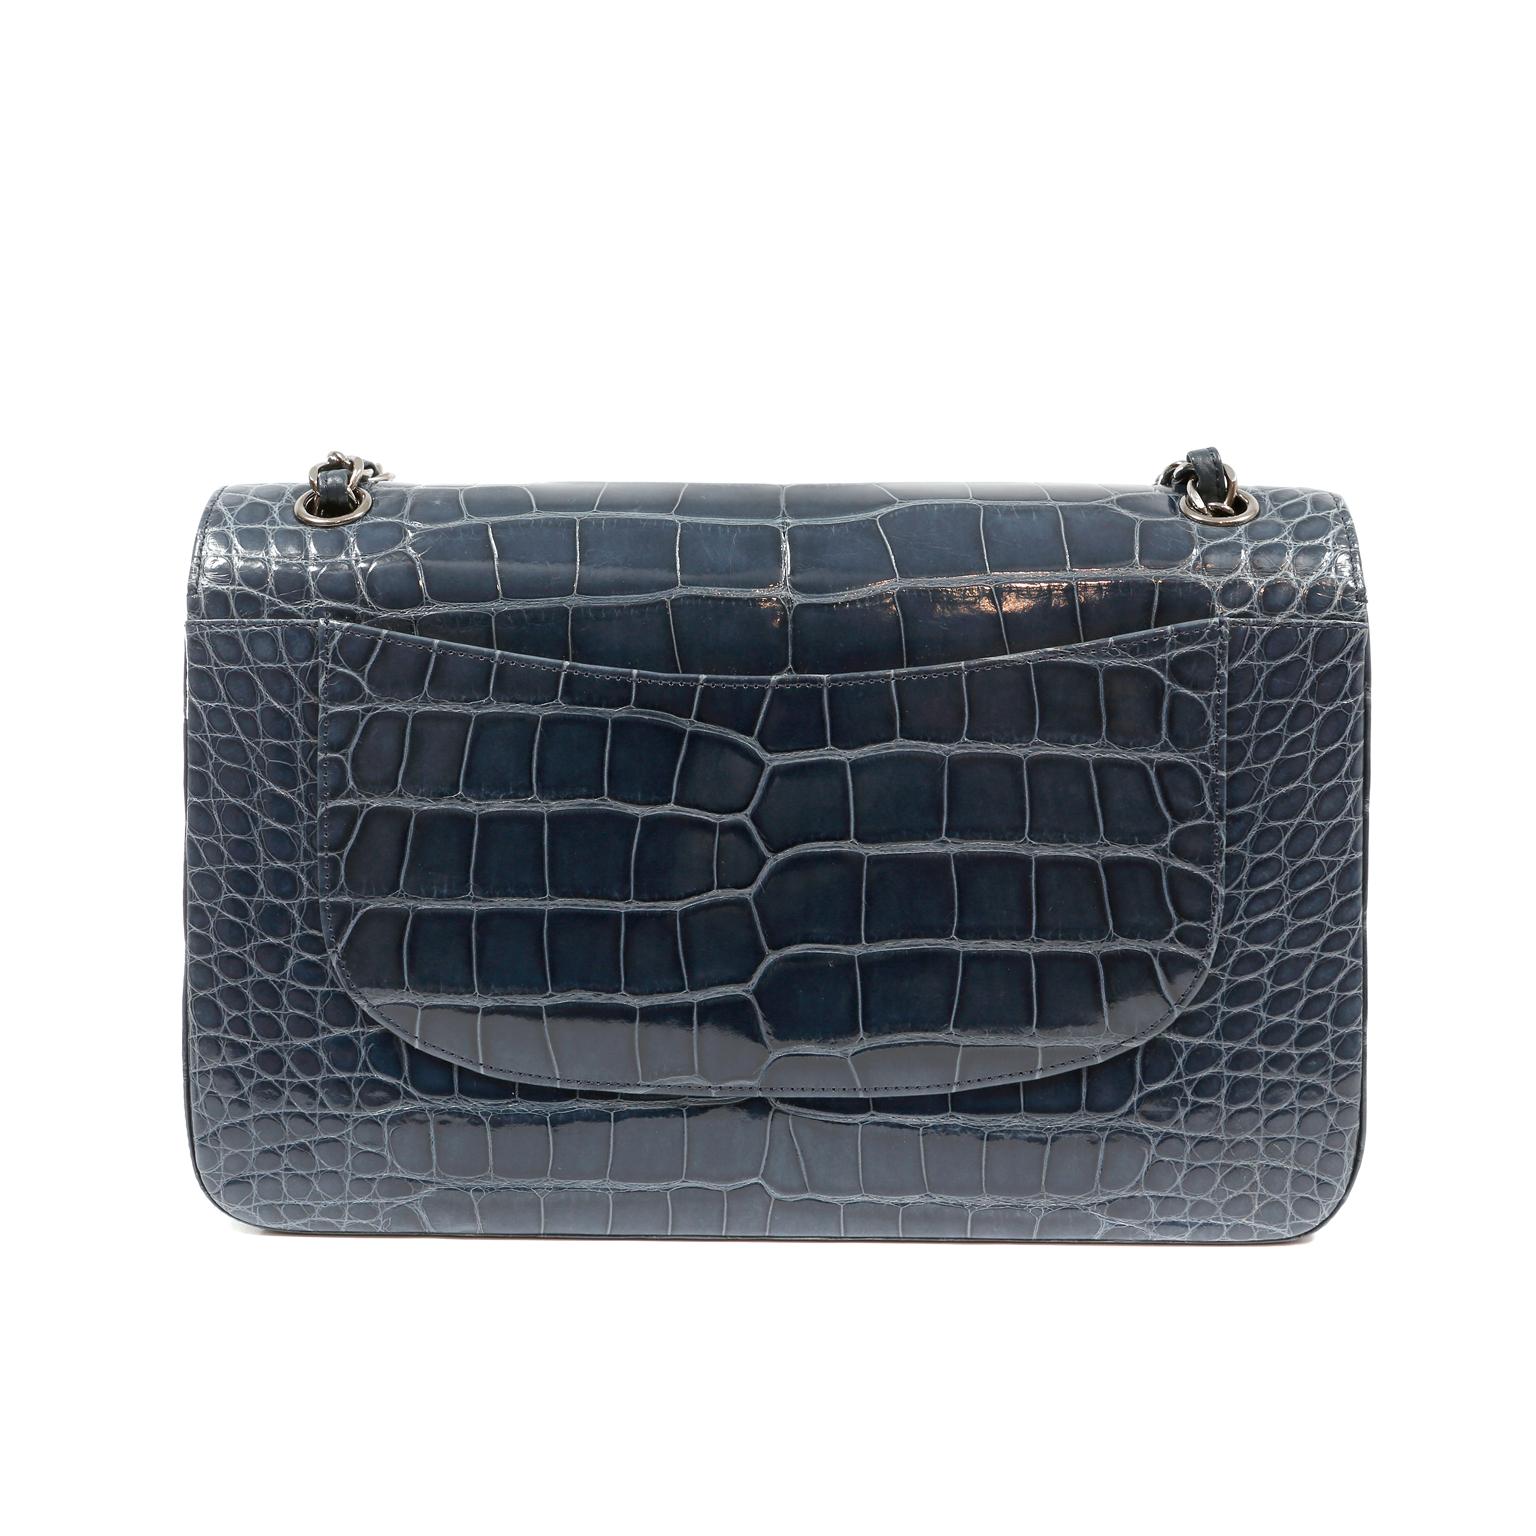 This authentic Chanel Indigo Blue Alligator Jumbo Classic is in pristine condition.  The highly coveted Jumbo Classic is elevated to new heights in this rare exotic version.
Deep indigo blue alligator skin is accented with dark silver interlocking